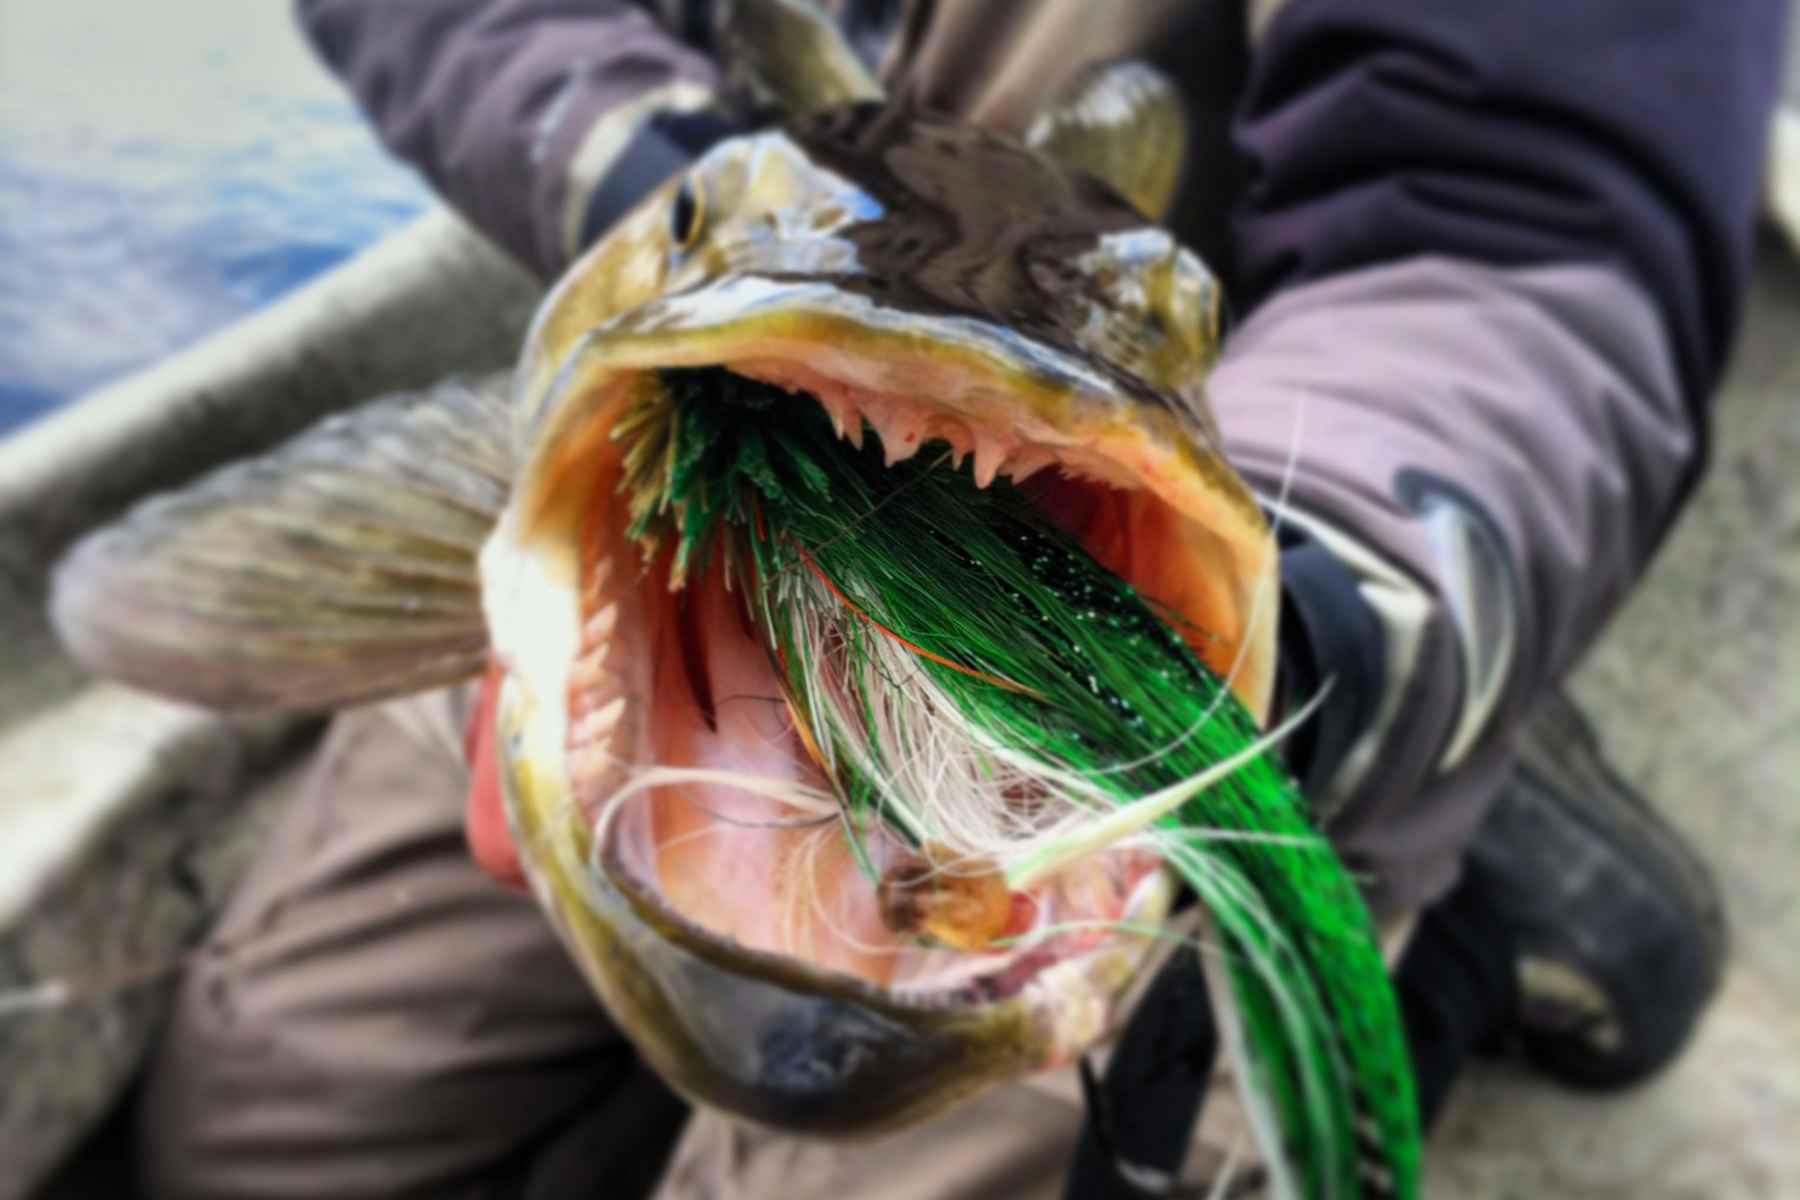 Echo Musky with The Northern Angler 